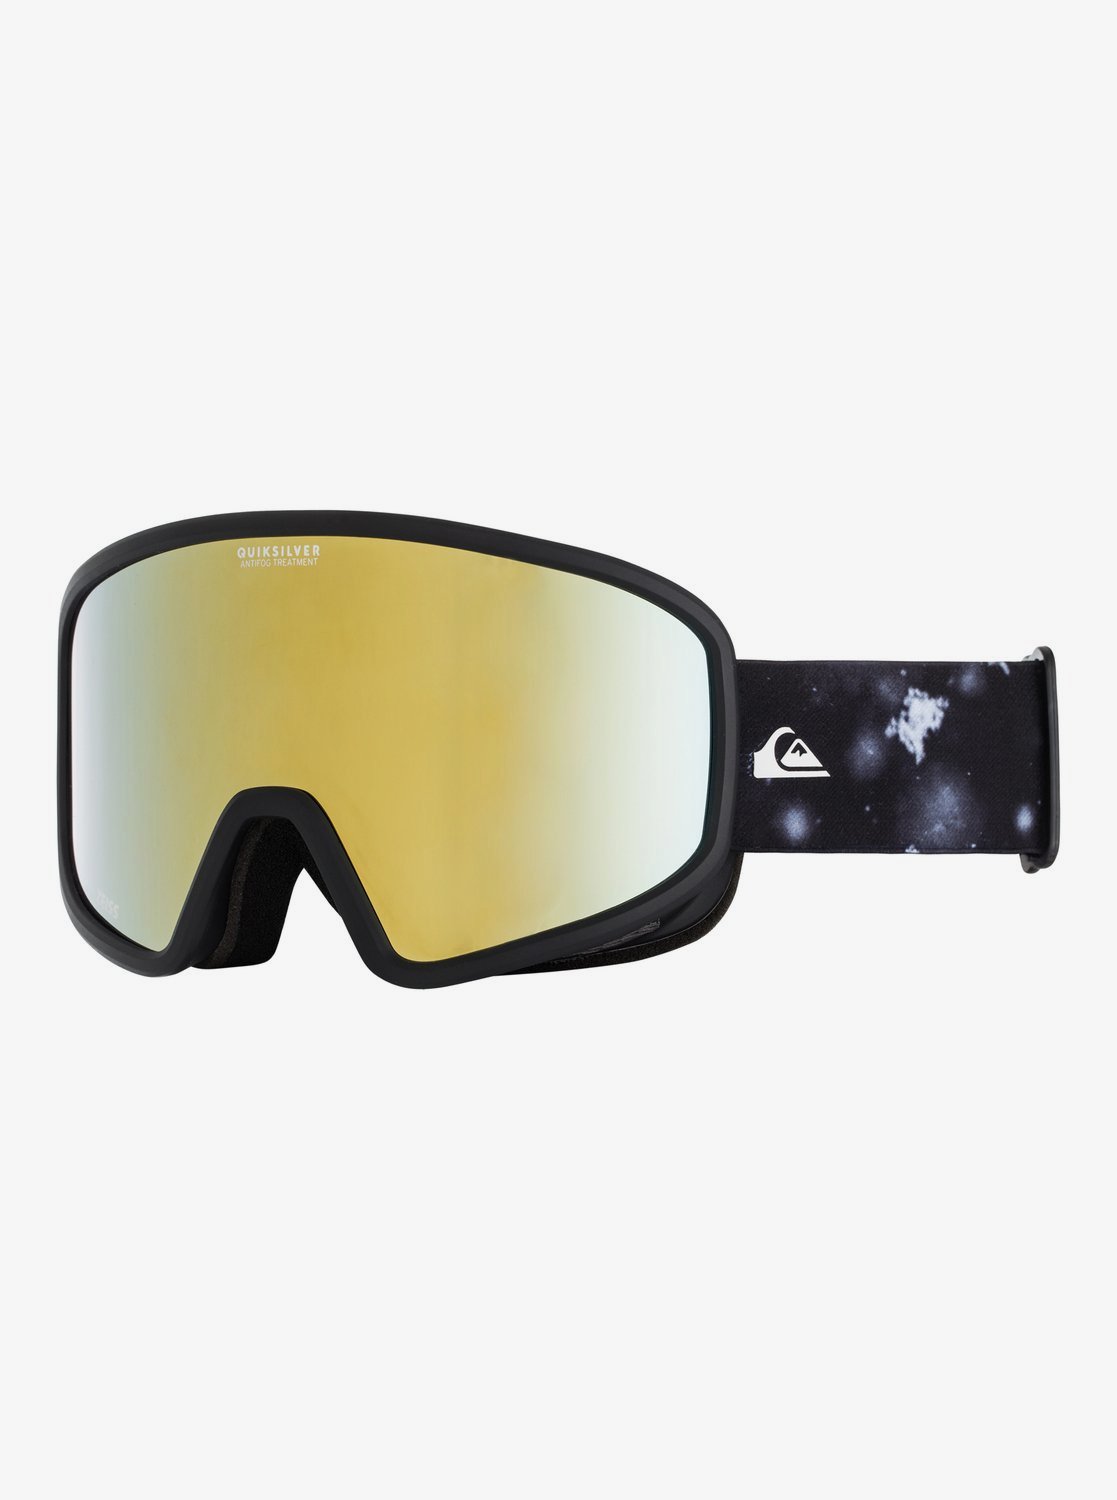 Quiksilver Browdy goggle true black woolflakes / gold chrome